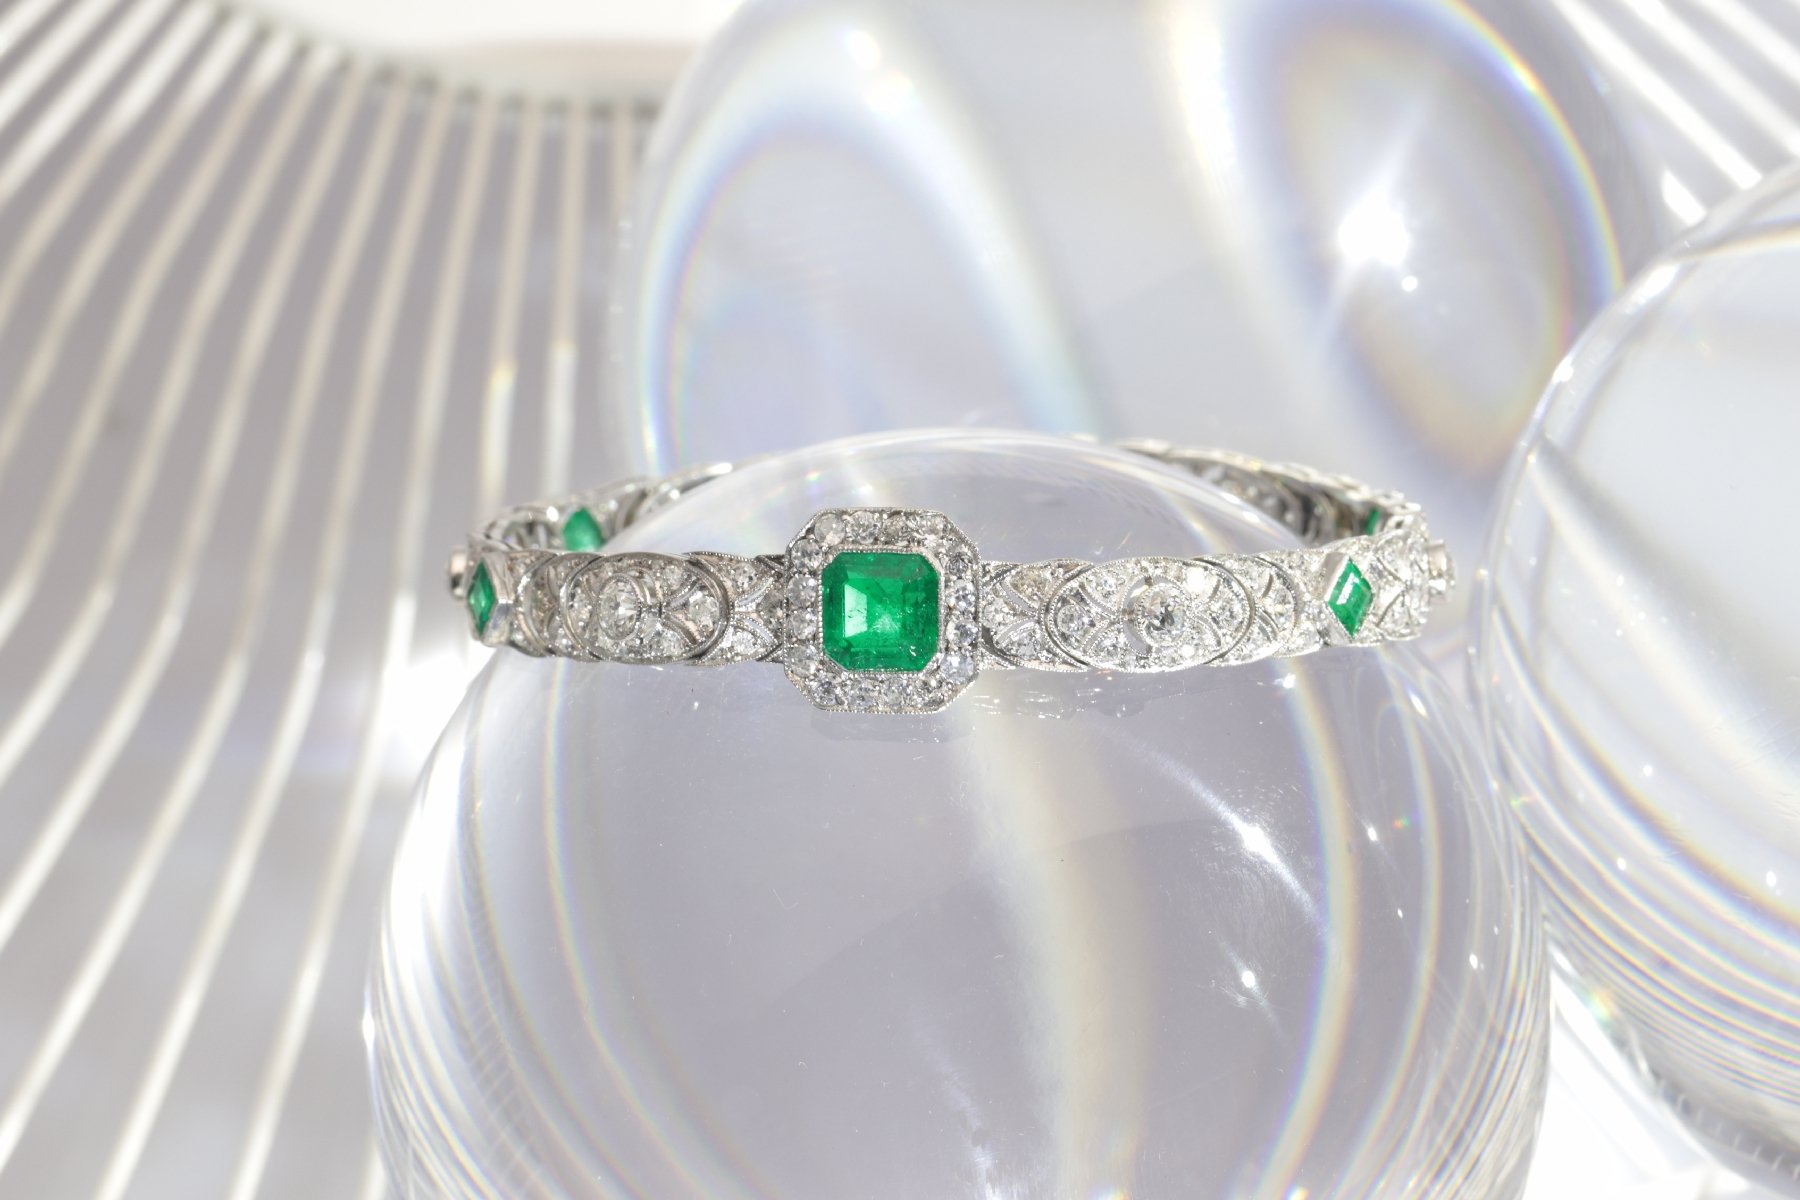 Click the picture to get to see this High quality platinum Art Deco bracelet with 140 diamonds and top emeralds.